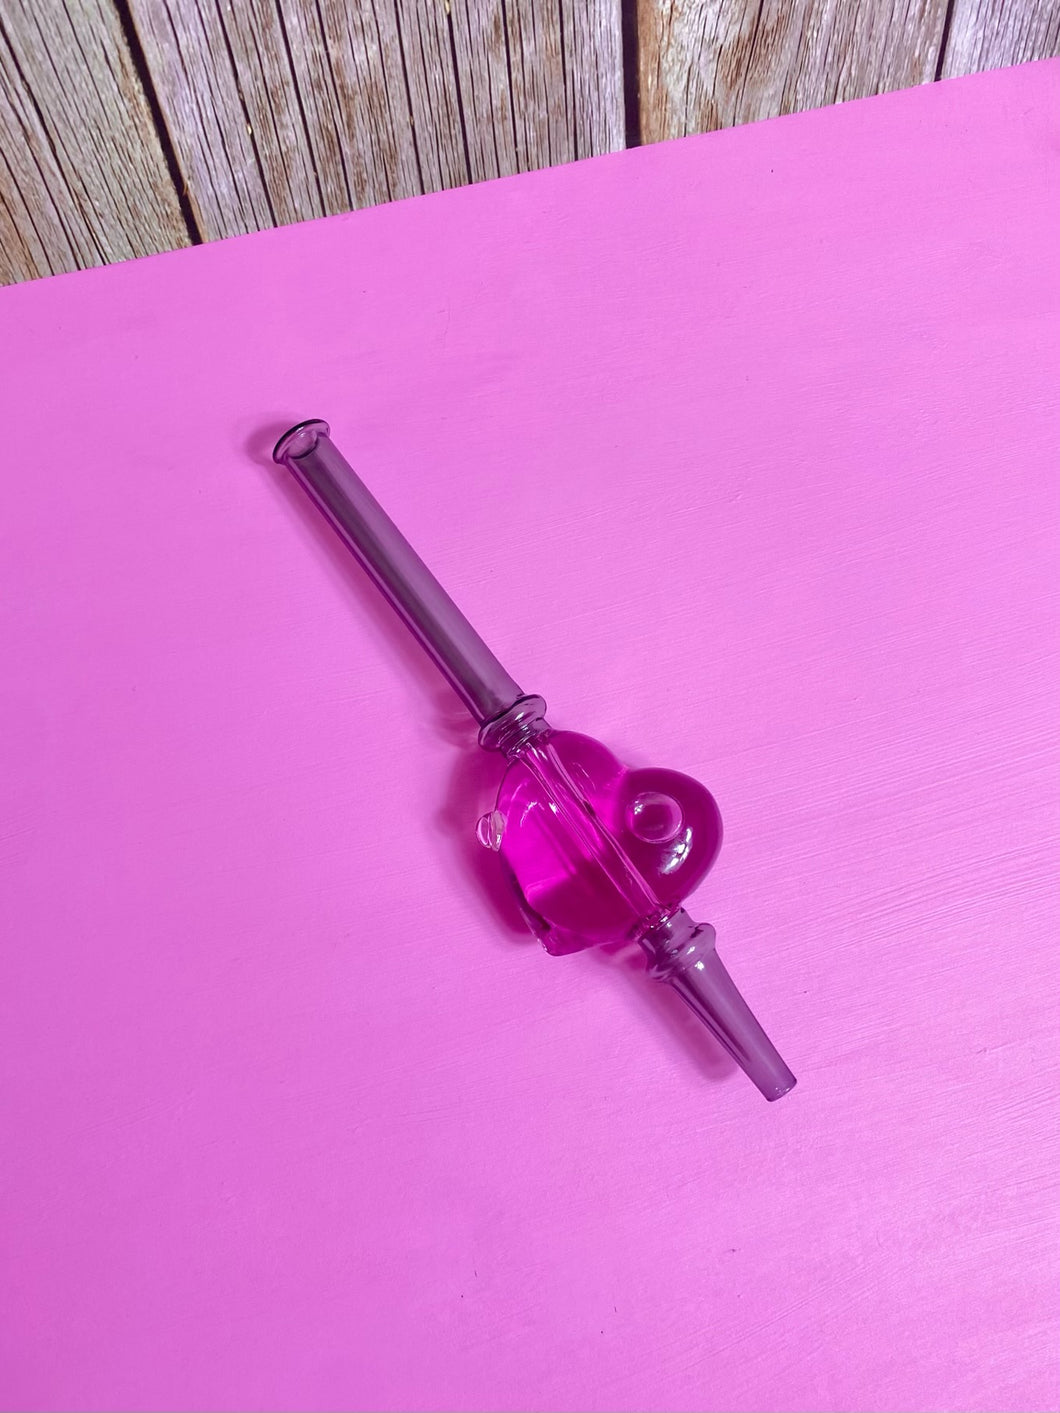 Freezable Heart Nectar Collector dab tool